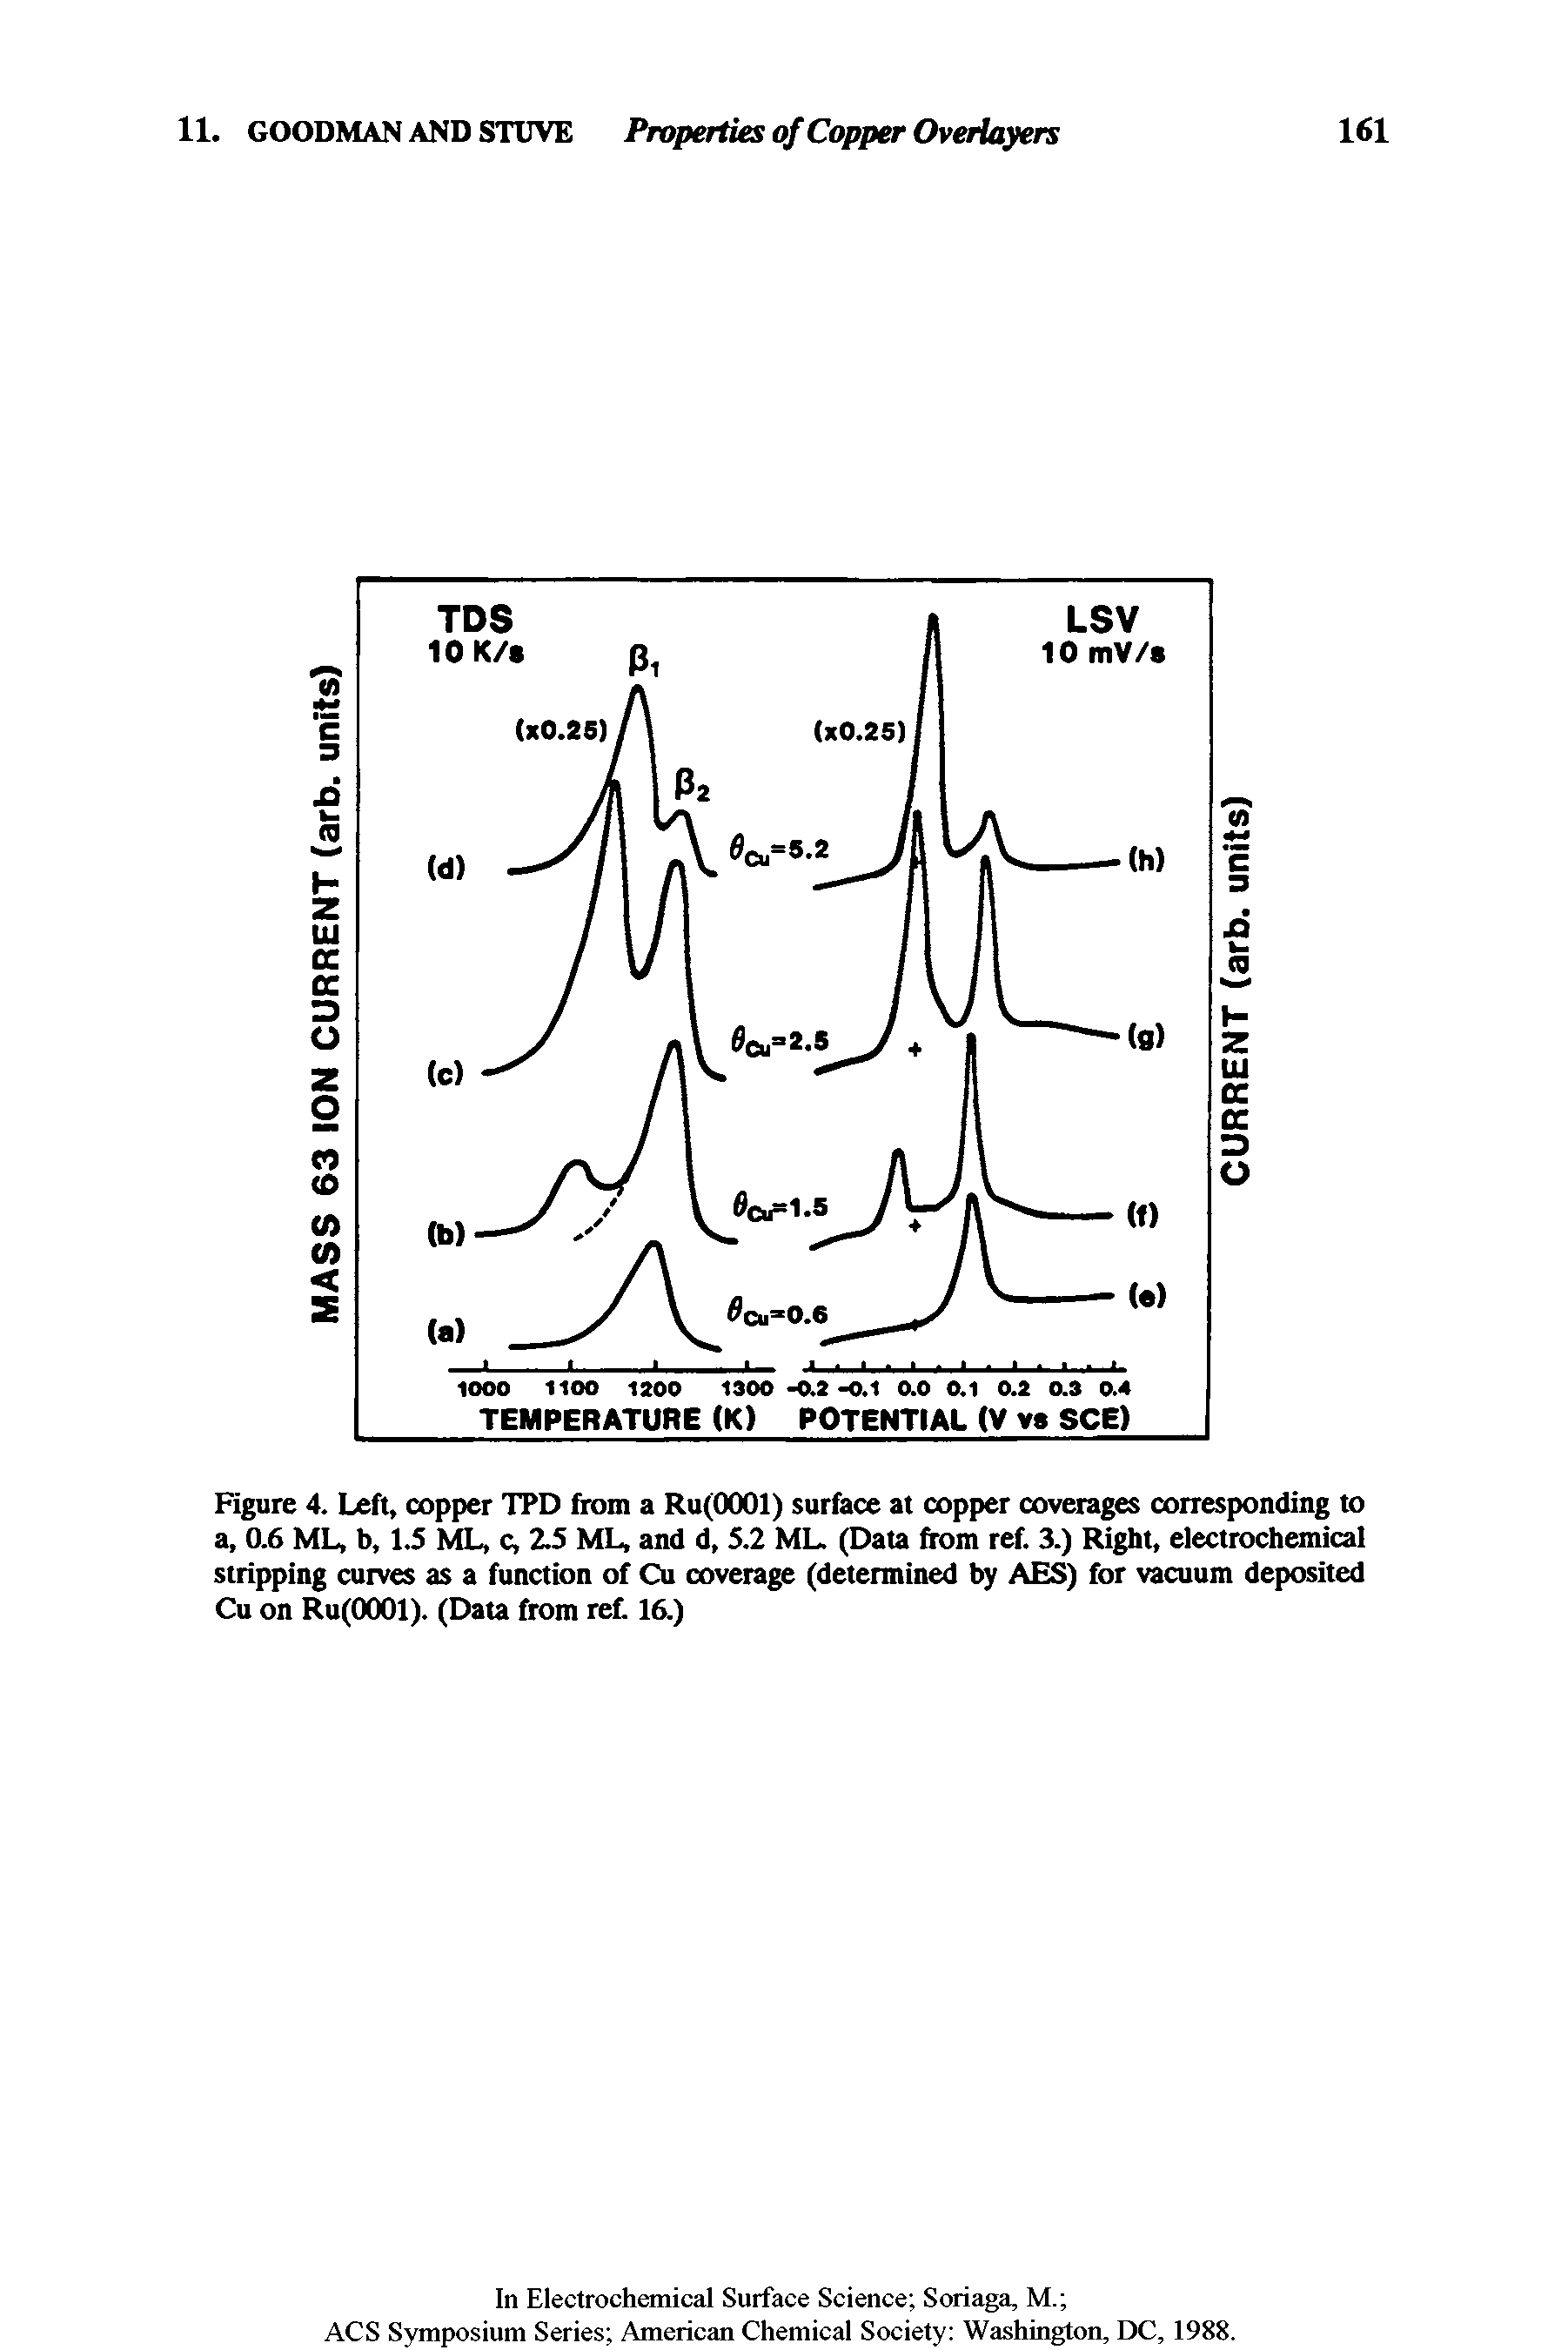 Figure 4. Left, copper TPD from a Ru(0001) surface at copper coverages corresponding to a, 0.6 ML, b, 1.5 ML, c, 2.5 ML, and d, 5.2 ML. (Data from ref. 3.) Right, electrochemical stripping curves as a function of Cu coverage (determined by AES) for vacuum deposited Cu on Ru(0001). (Data from ref. 16.)...